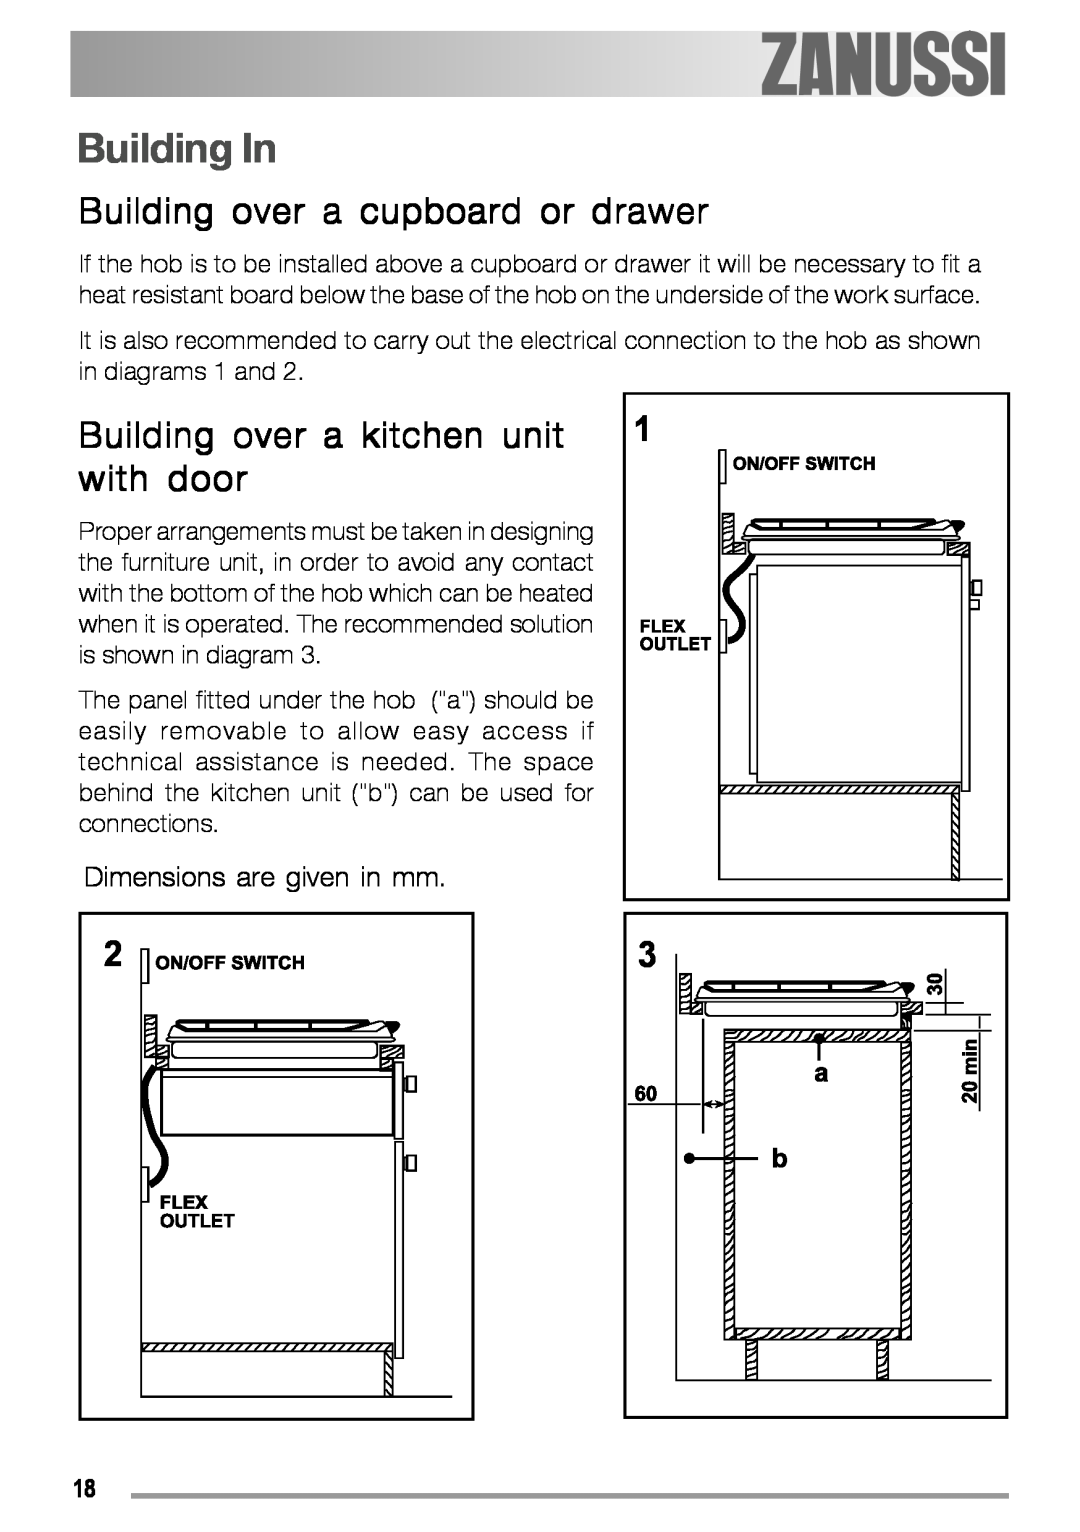 Zanussi ZGS 322 manual Building In, Building over a cupboard or drawer, Building over a kitchen unit with door 